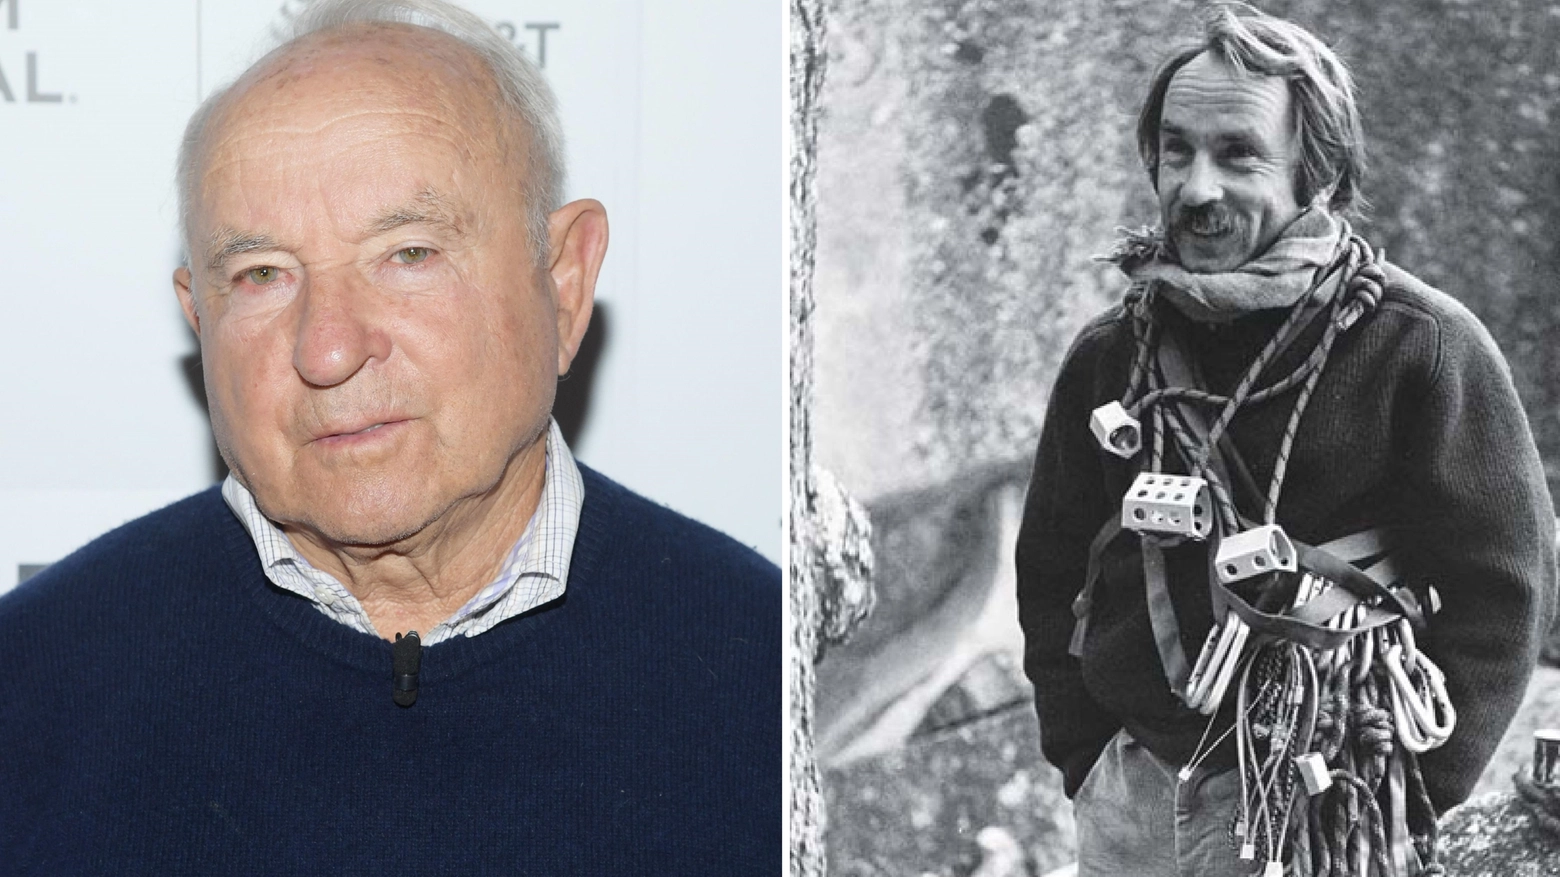 Yvon Chouinard (Getty Images/Tom Frost, Chouinard 1972 Catalog))